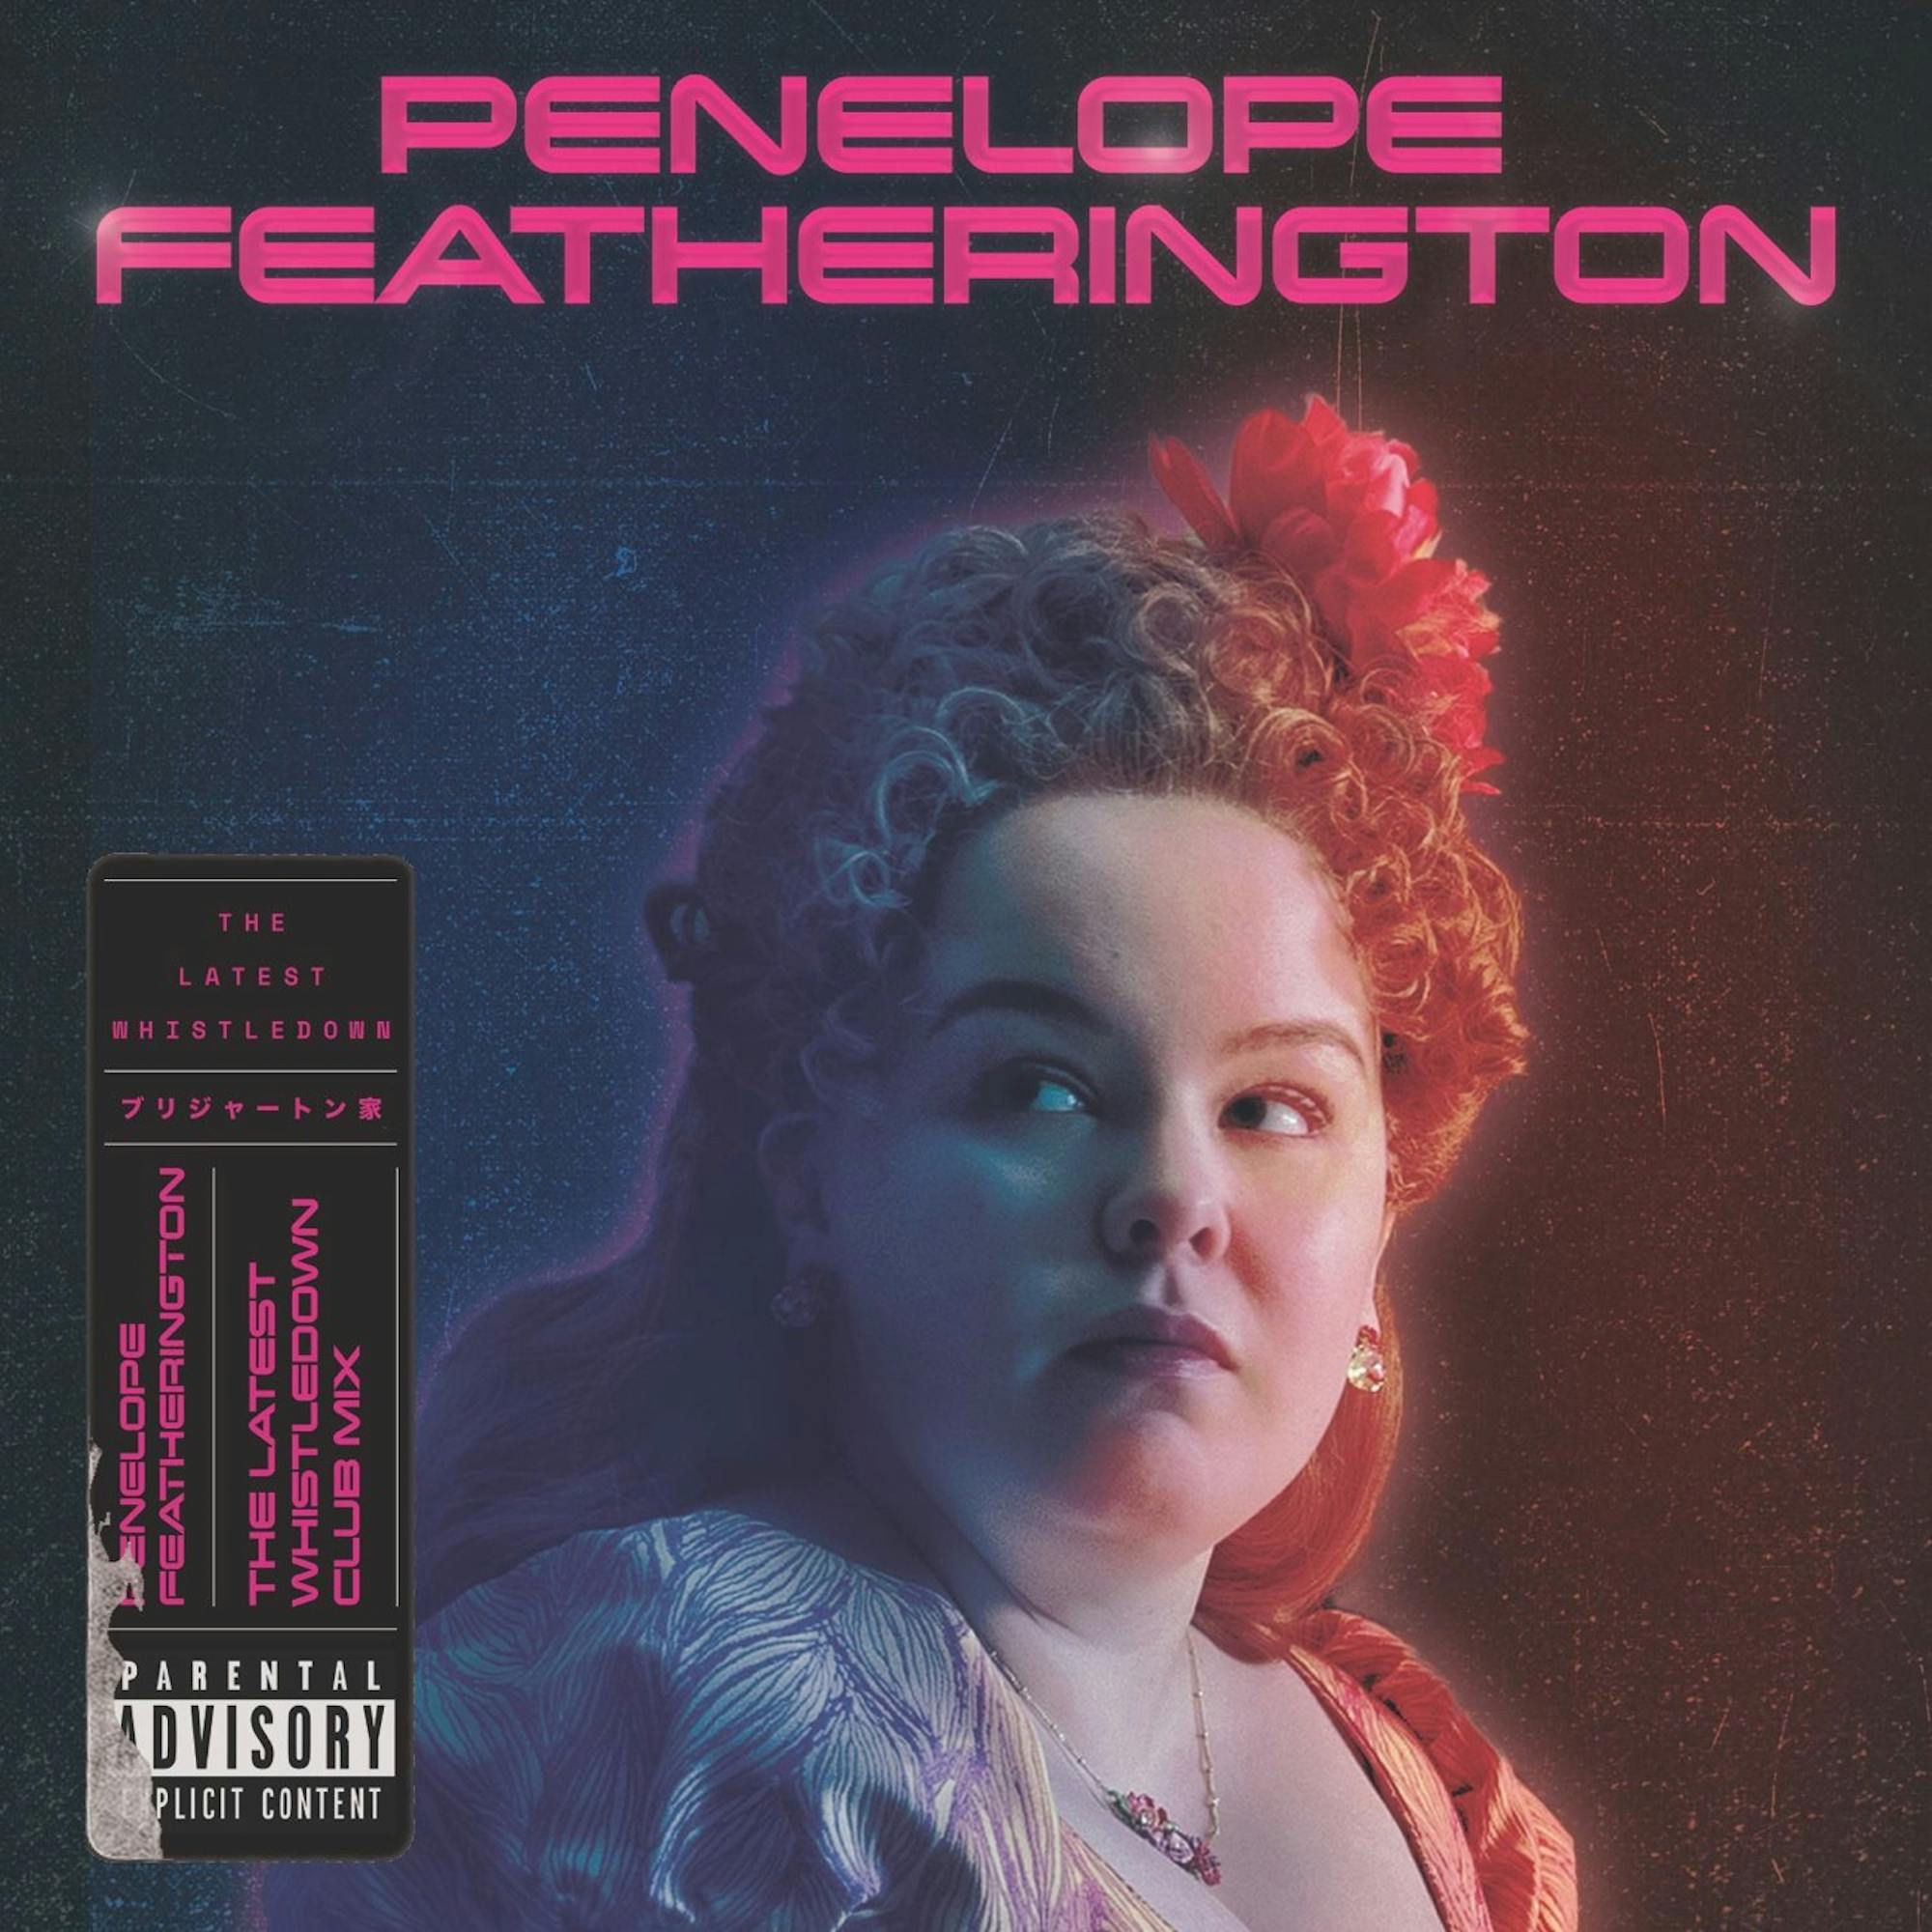 Penelope Featherington (Nicola Coughlan) on an album cover. Her name flashes in neon pink, and in the bottom left corner it reads: “The latest whistledown club mix,” and “Parental Advisory explicit content.” She wears an orange dress, her hair curled high and topped with flowers.